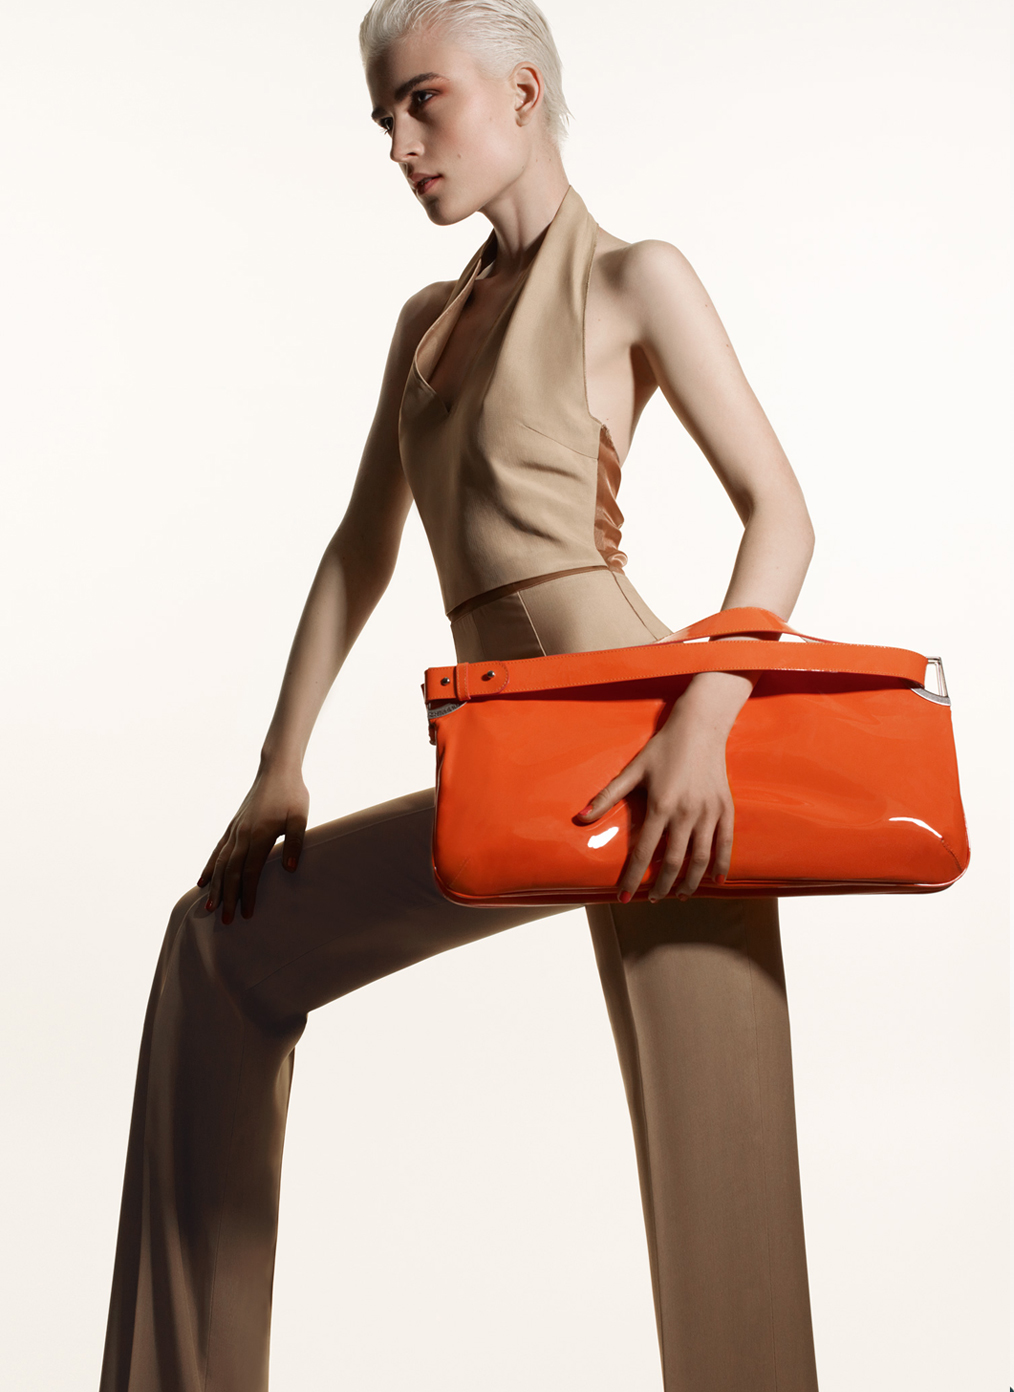 Costume National CNC SS 2011 Ad Campaign